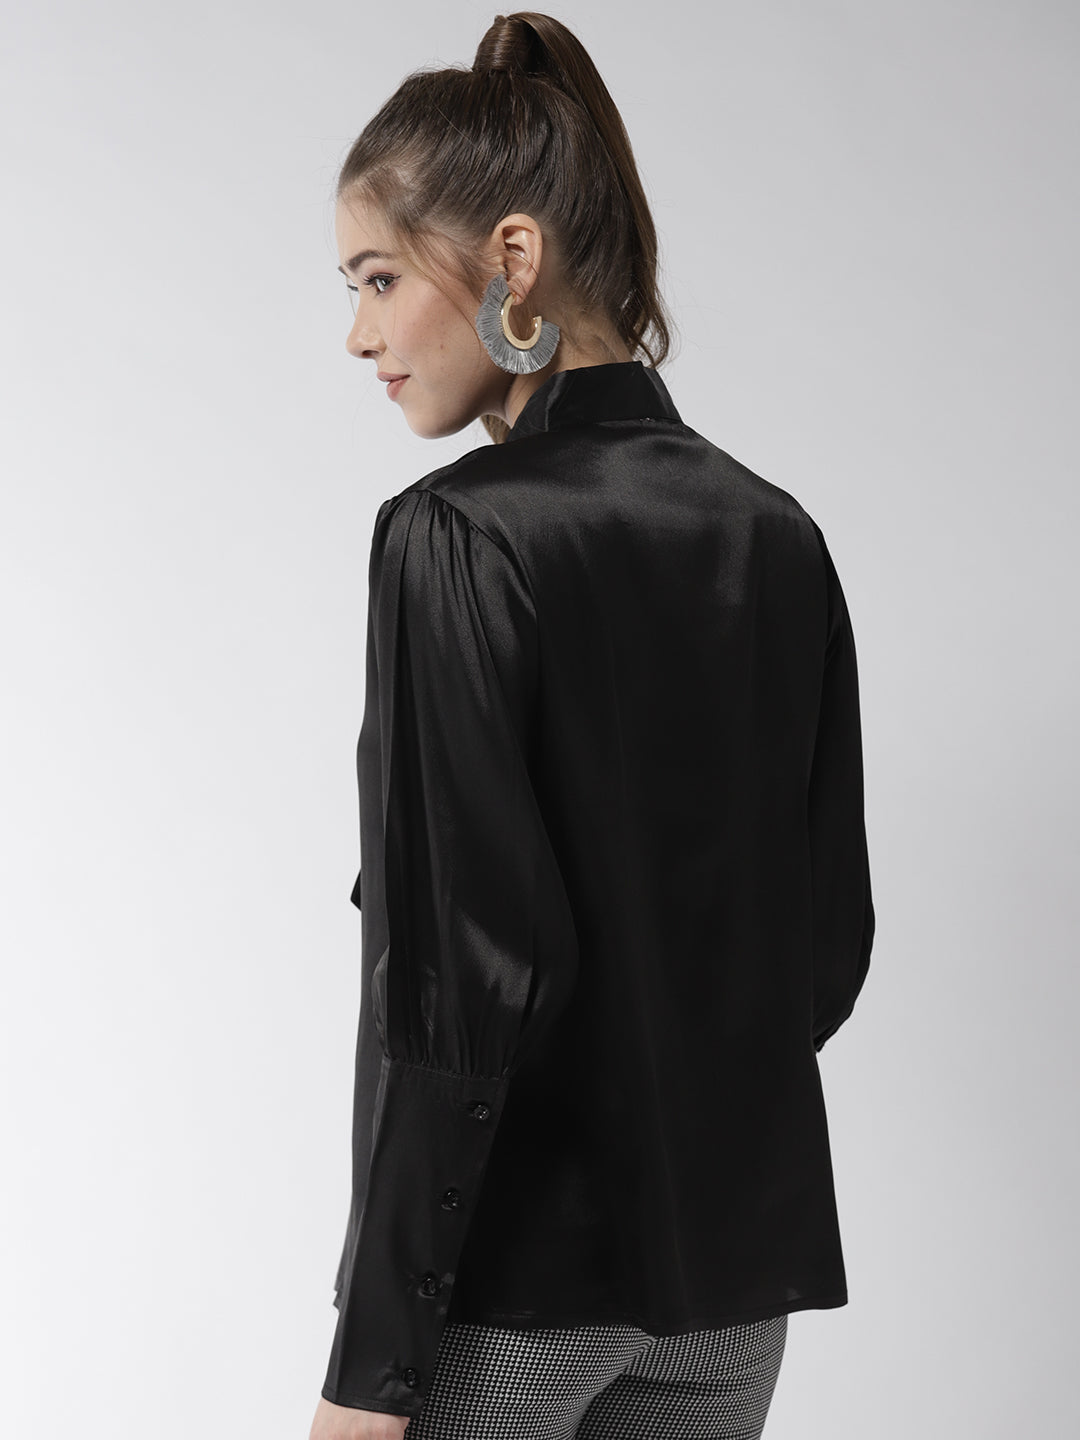 Women's Black Shirt with Long Cuff and attached Necktie - StyleStone